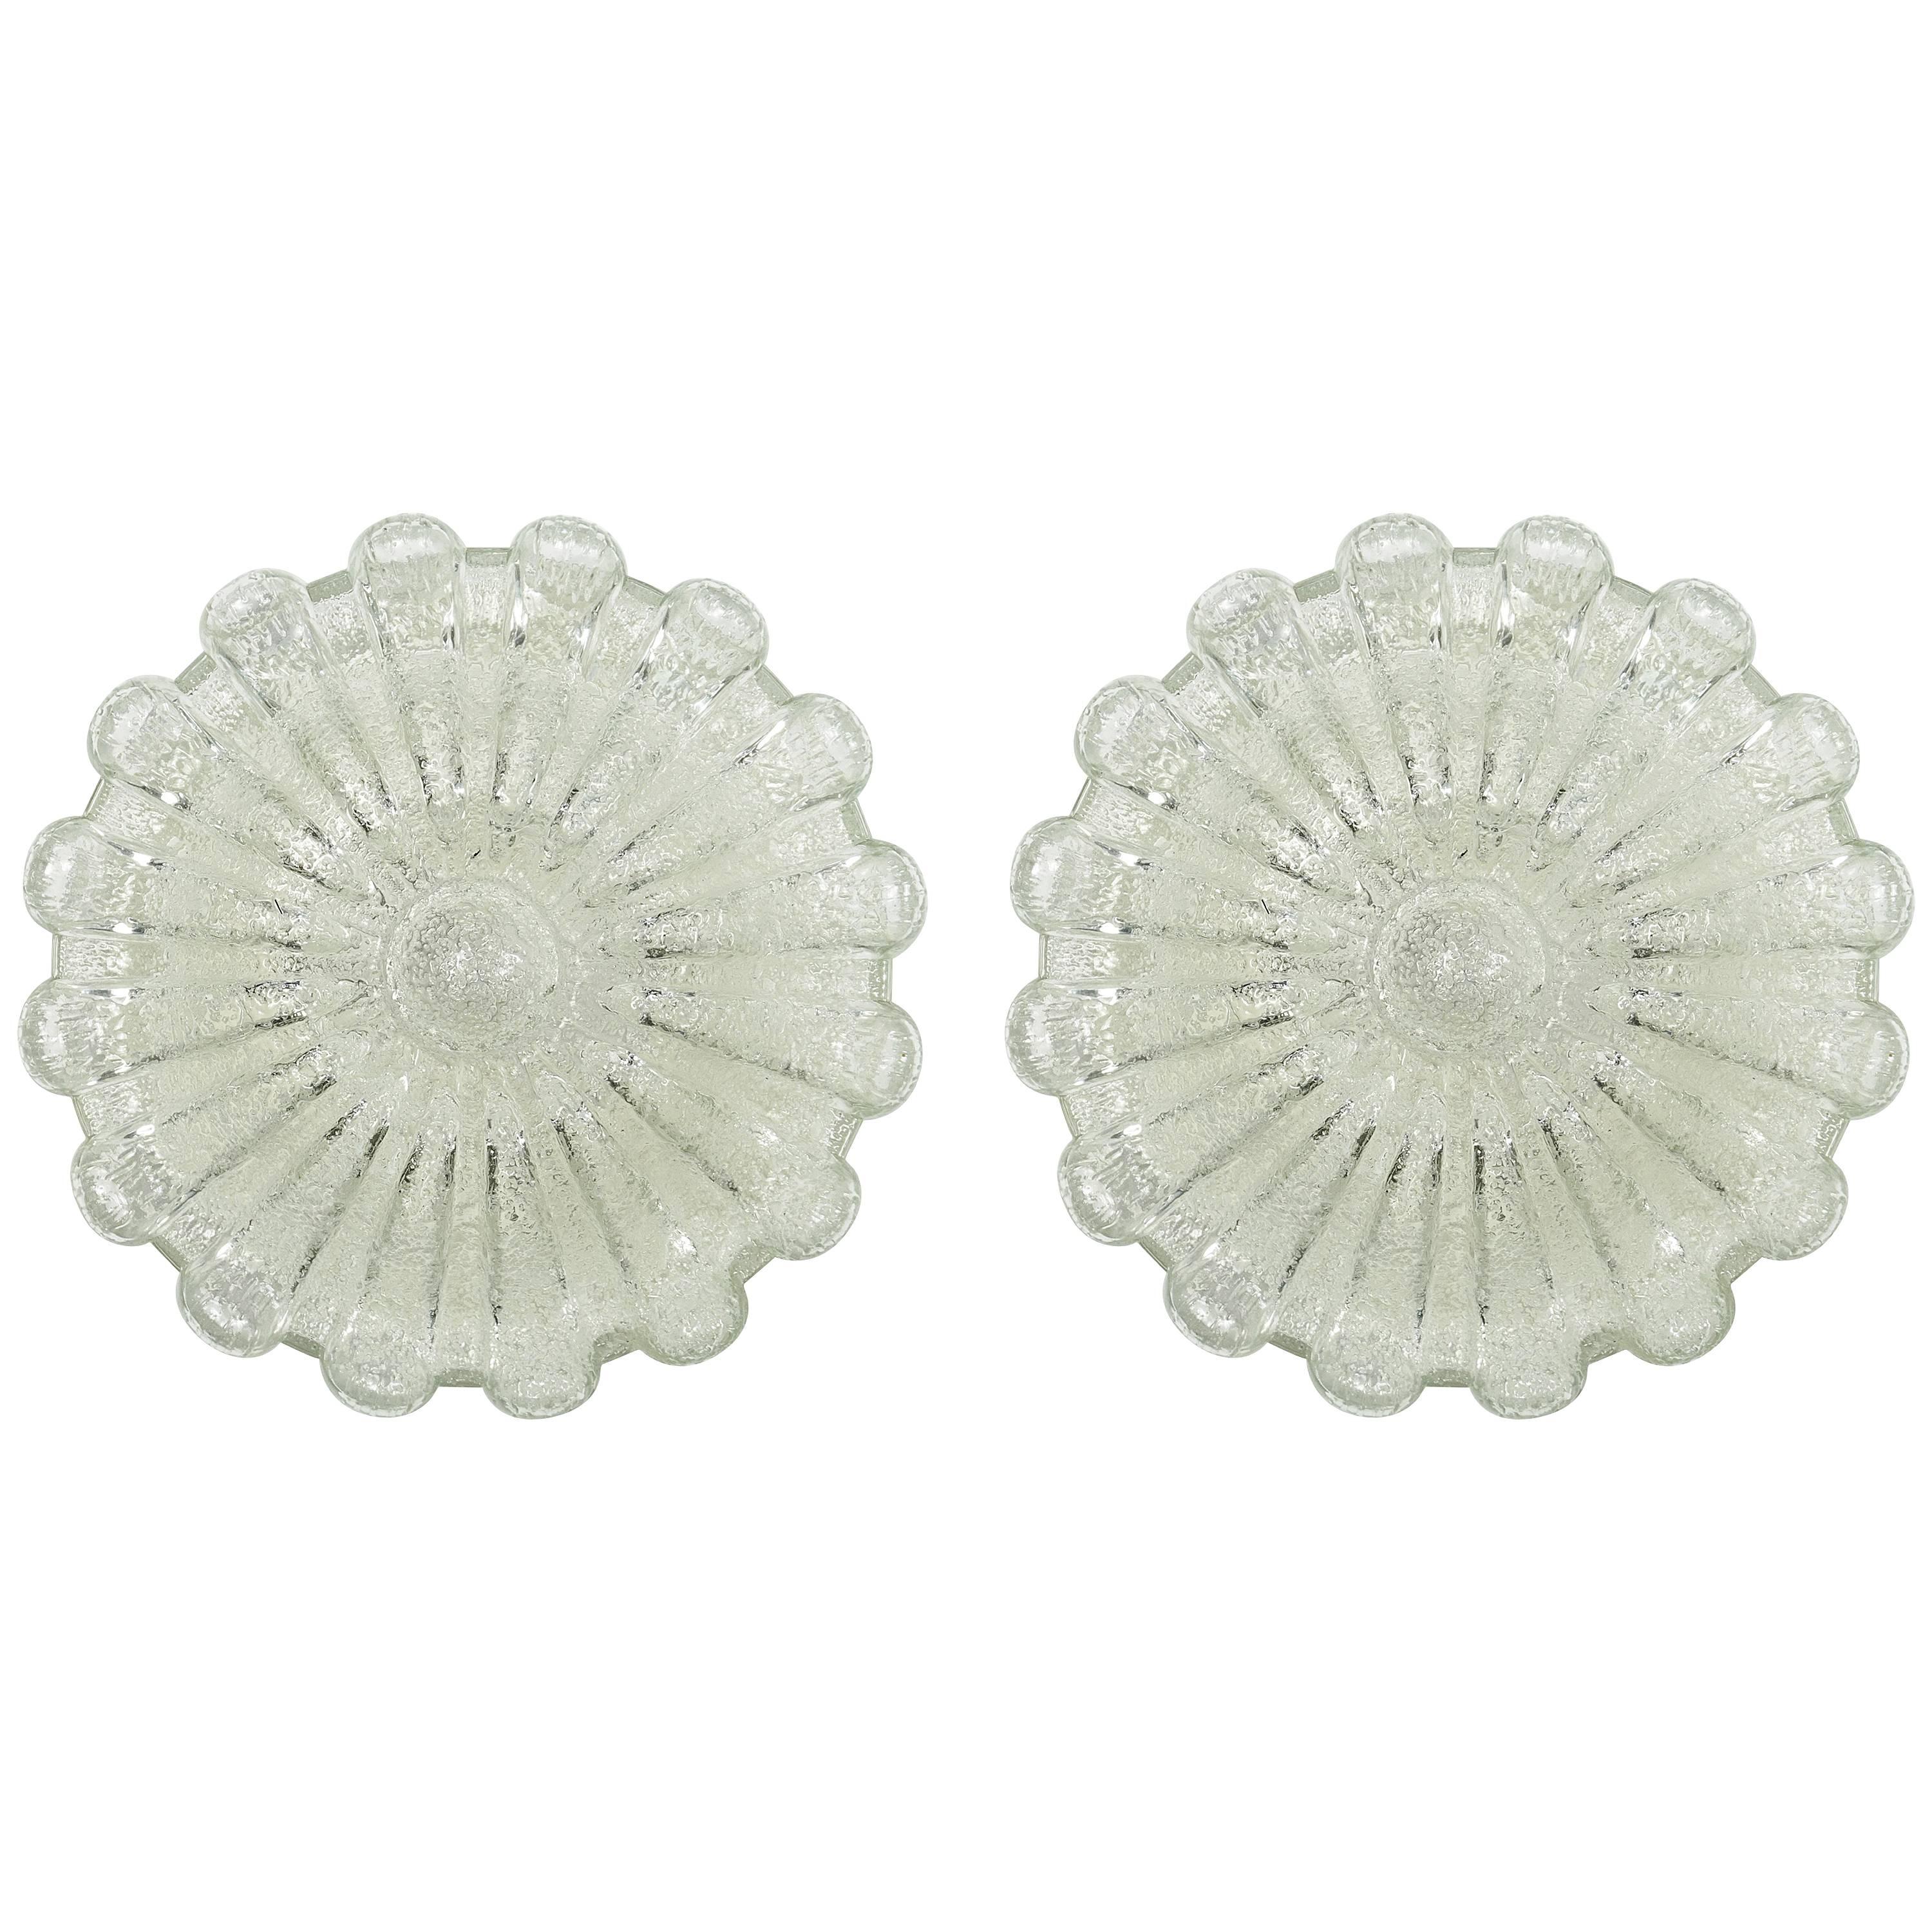 Pair of Ice Glass Flush Mounts by Helena Tynell